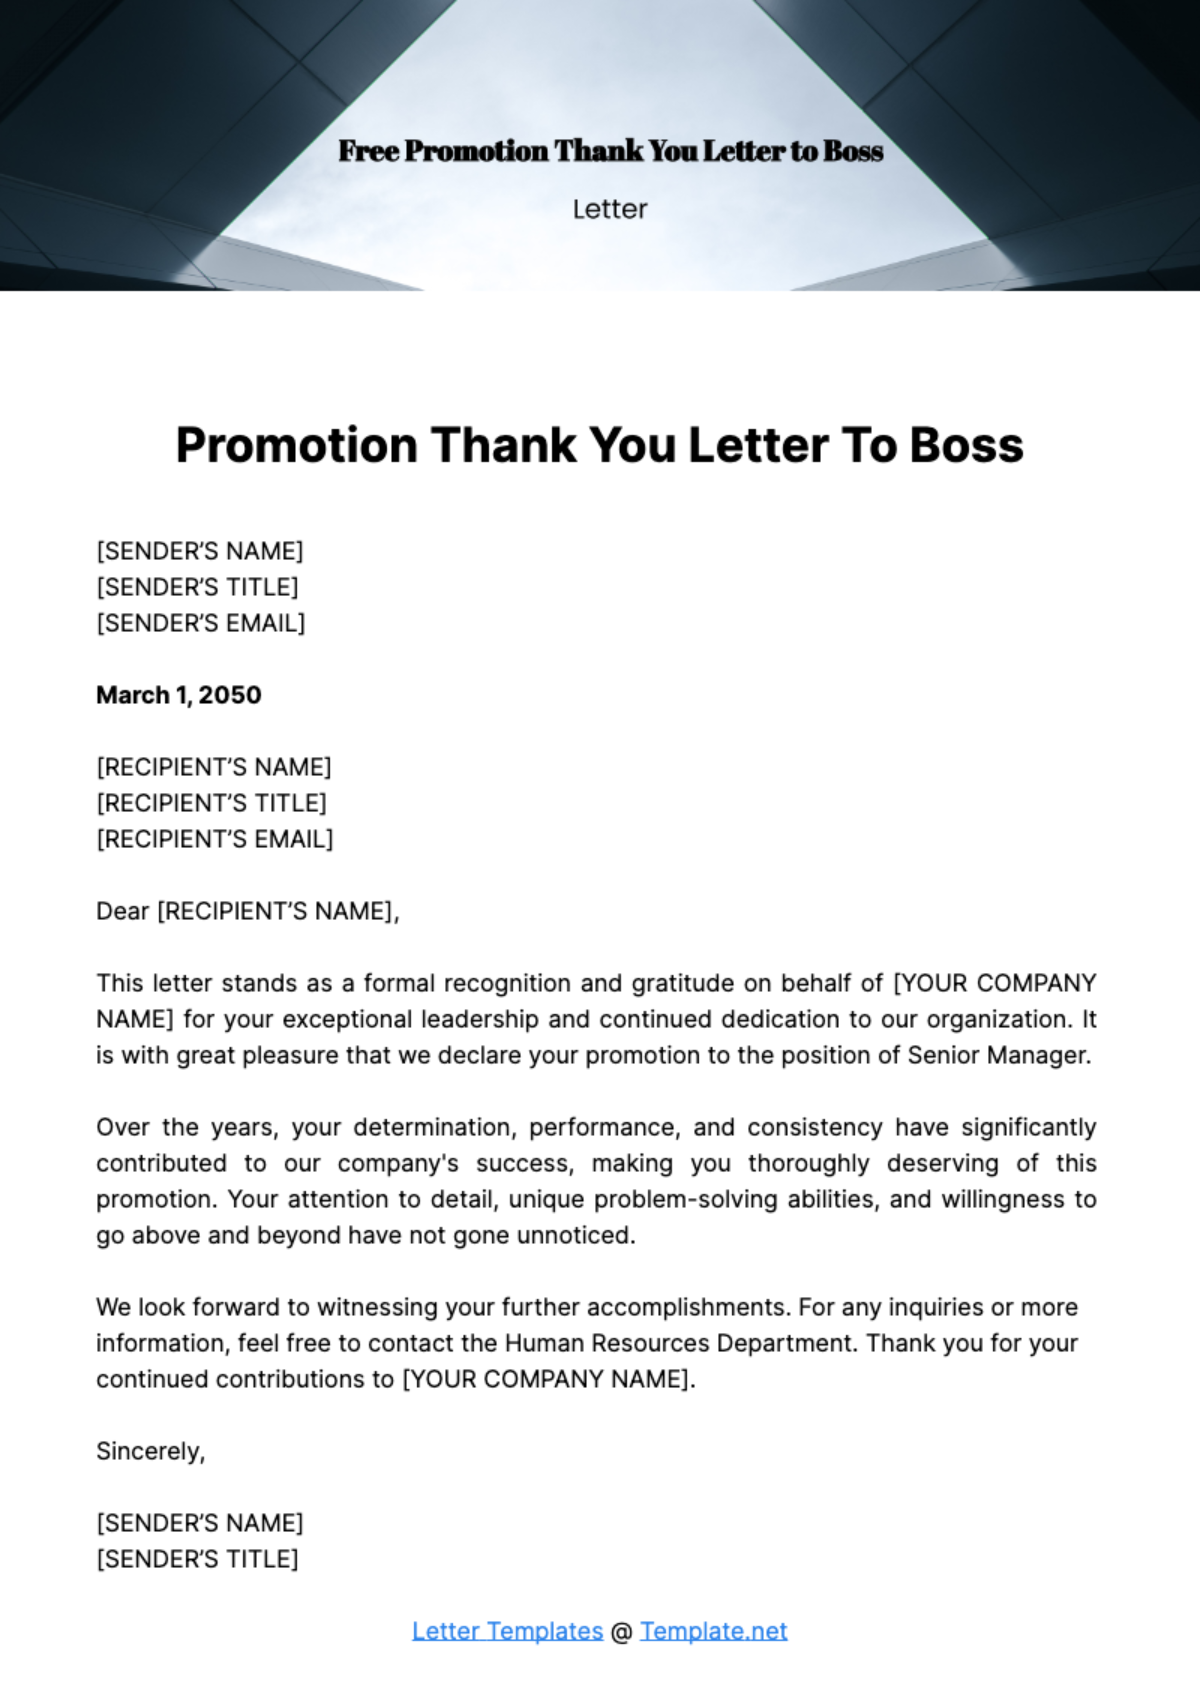 Free Promotion Thank You Letter to Boss Template